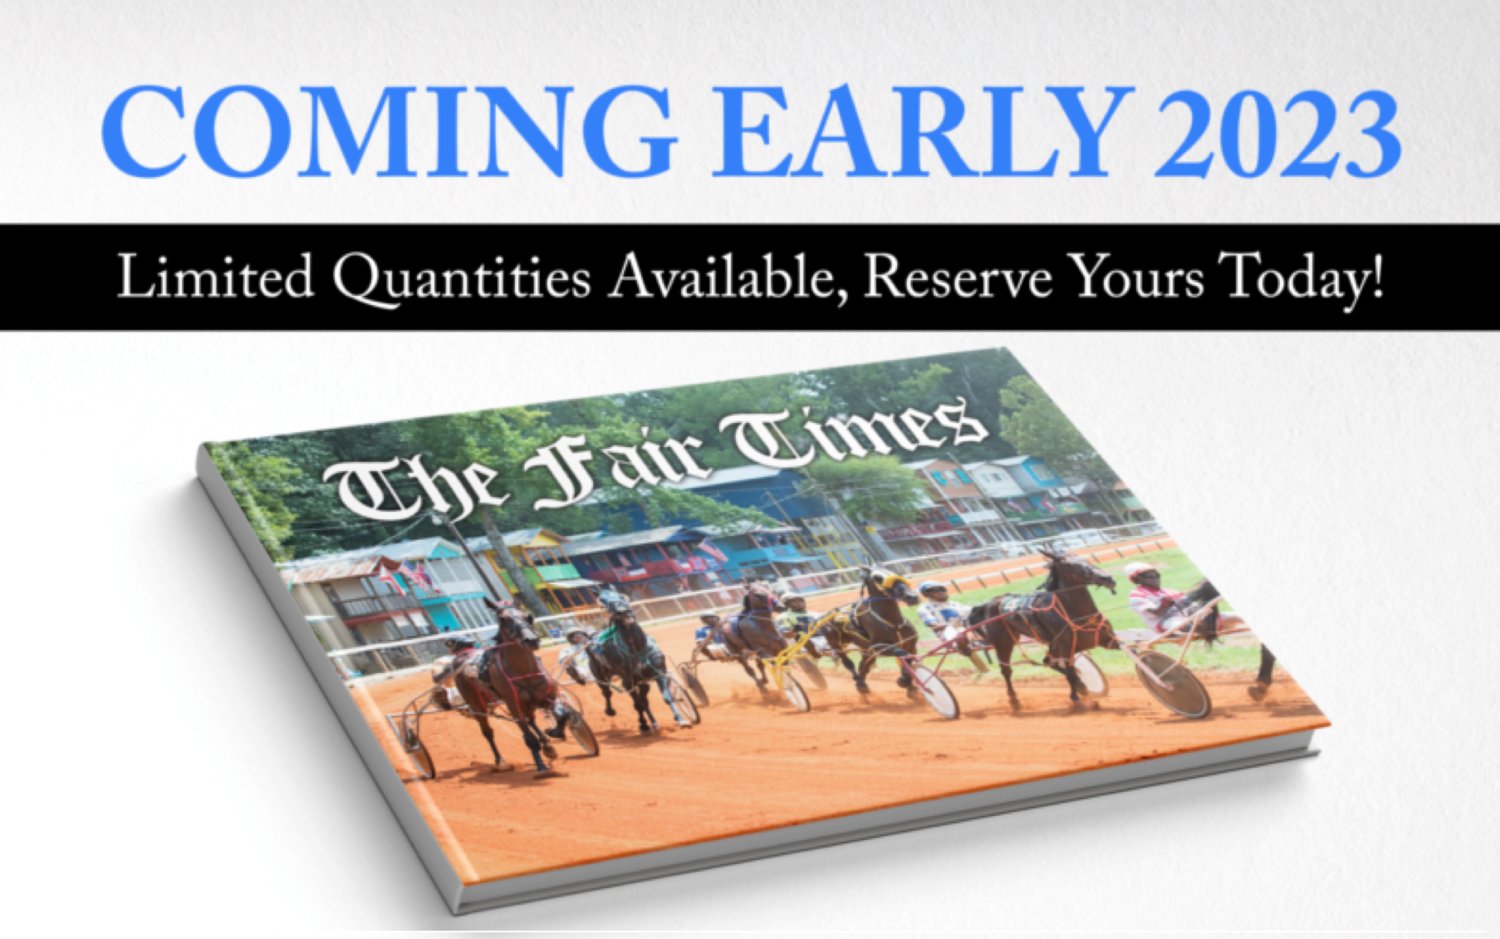 Fair Times coffee table book set for ’23 release